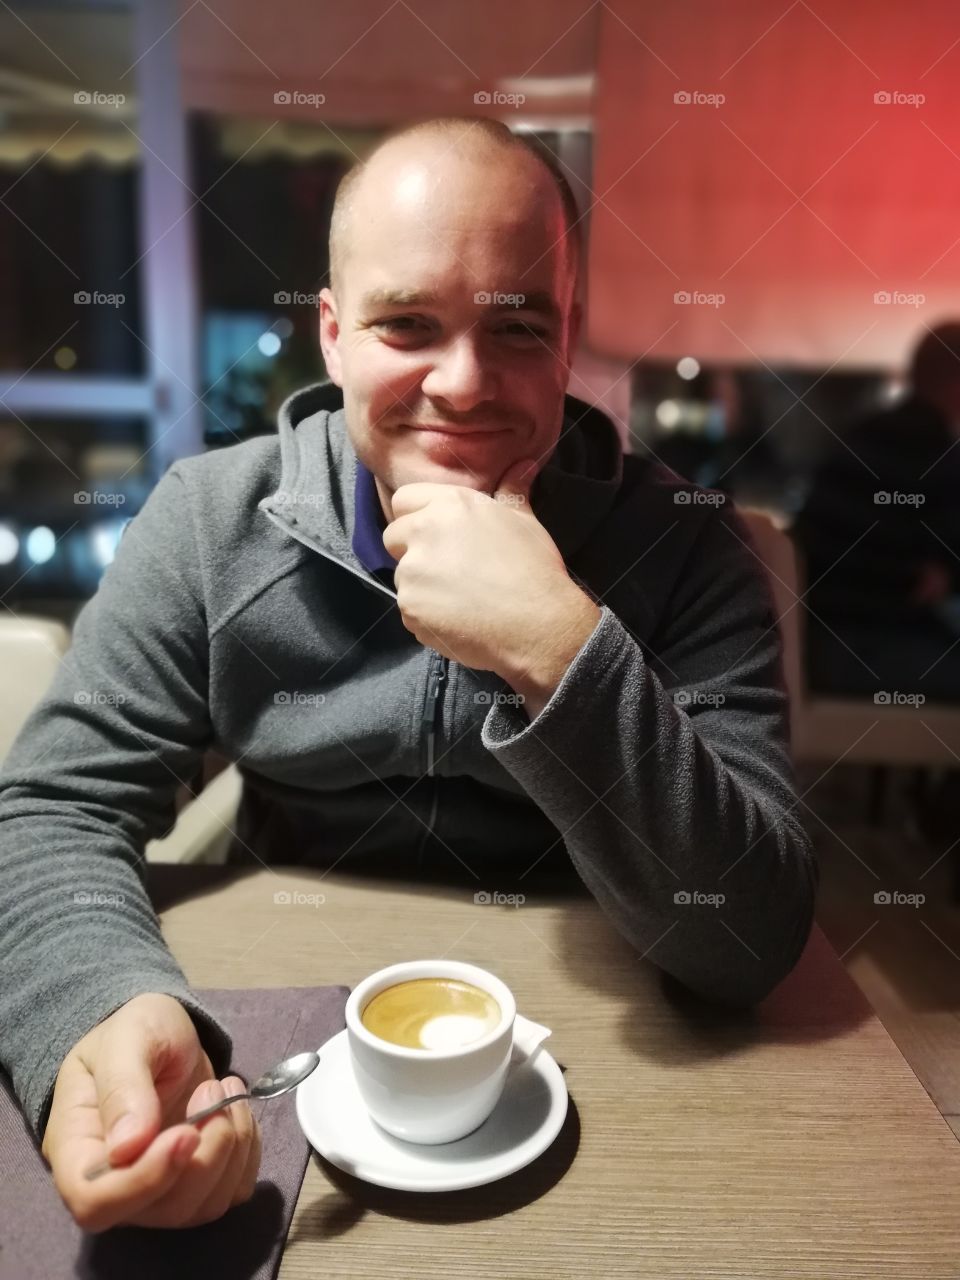 Man drinking coffee at a café, date night